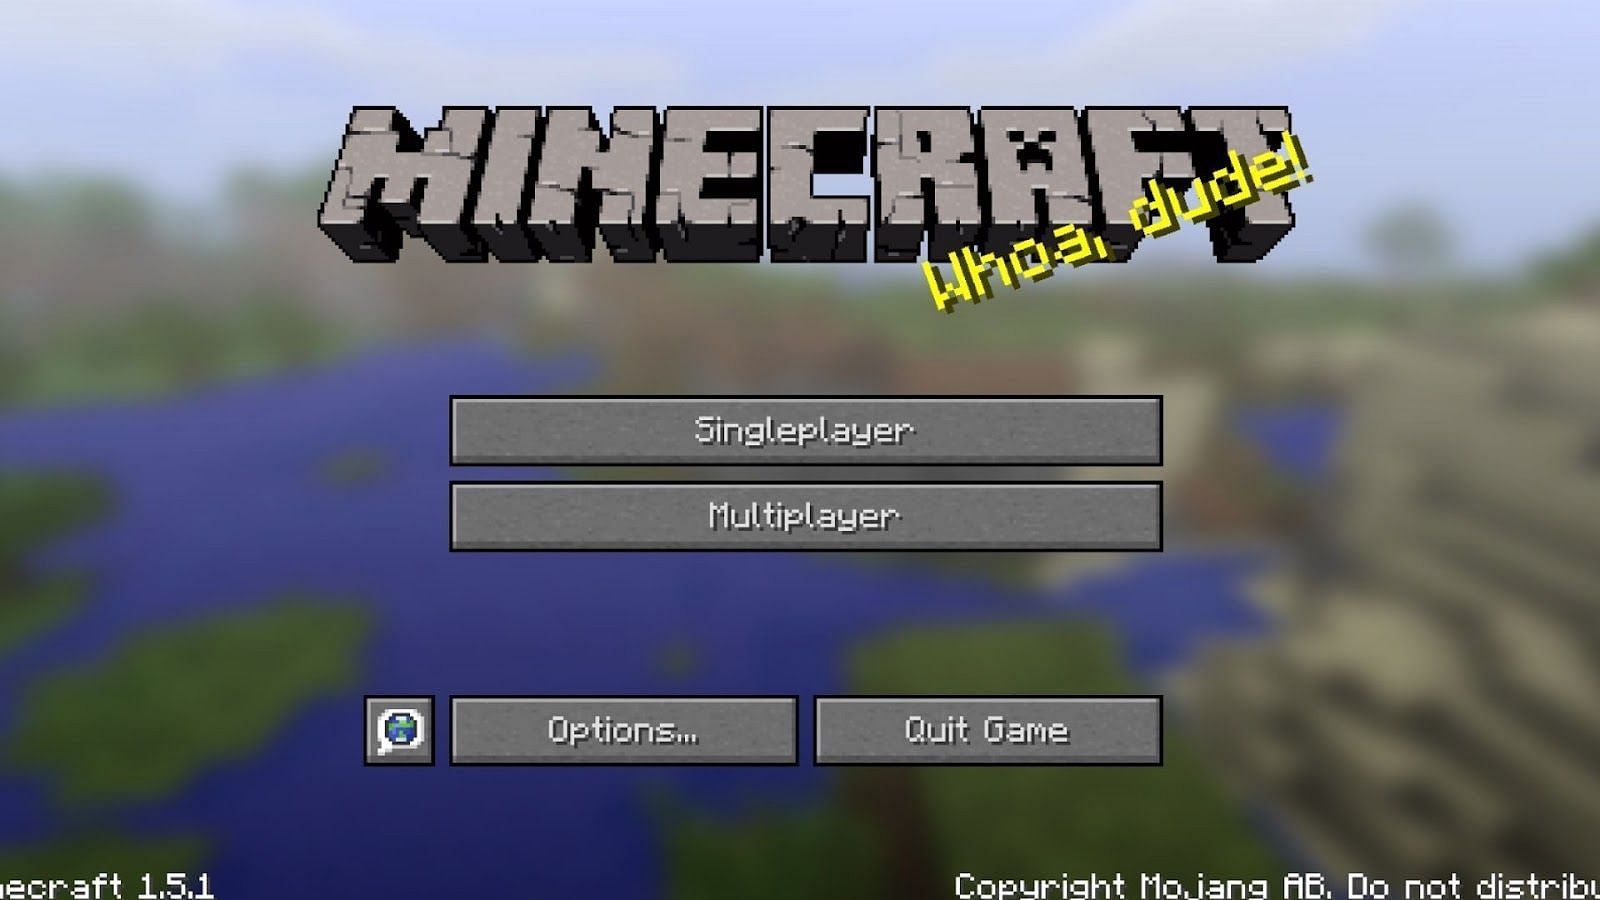 An iconic homepage - Minecraft defined a decade (via Mojang)